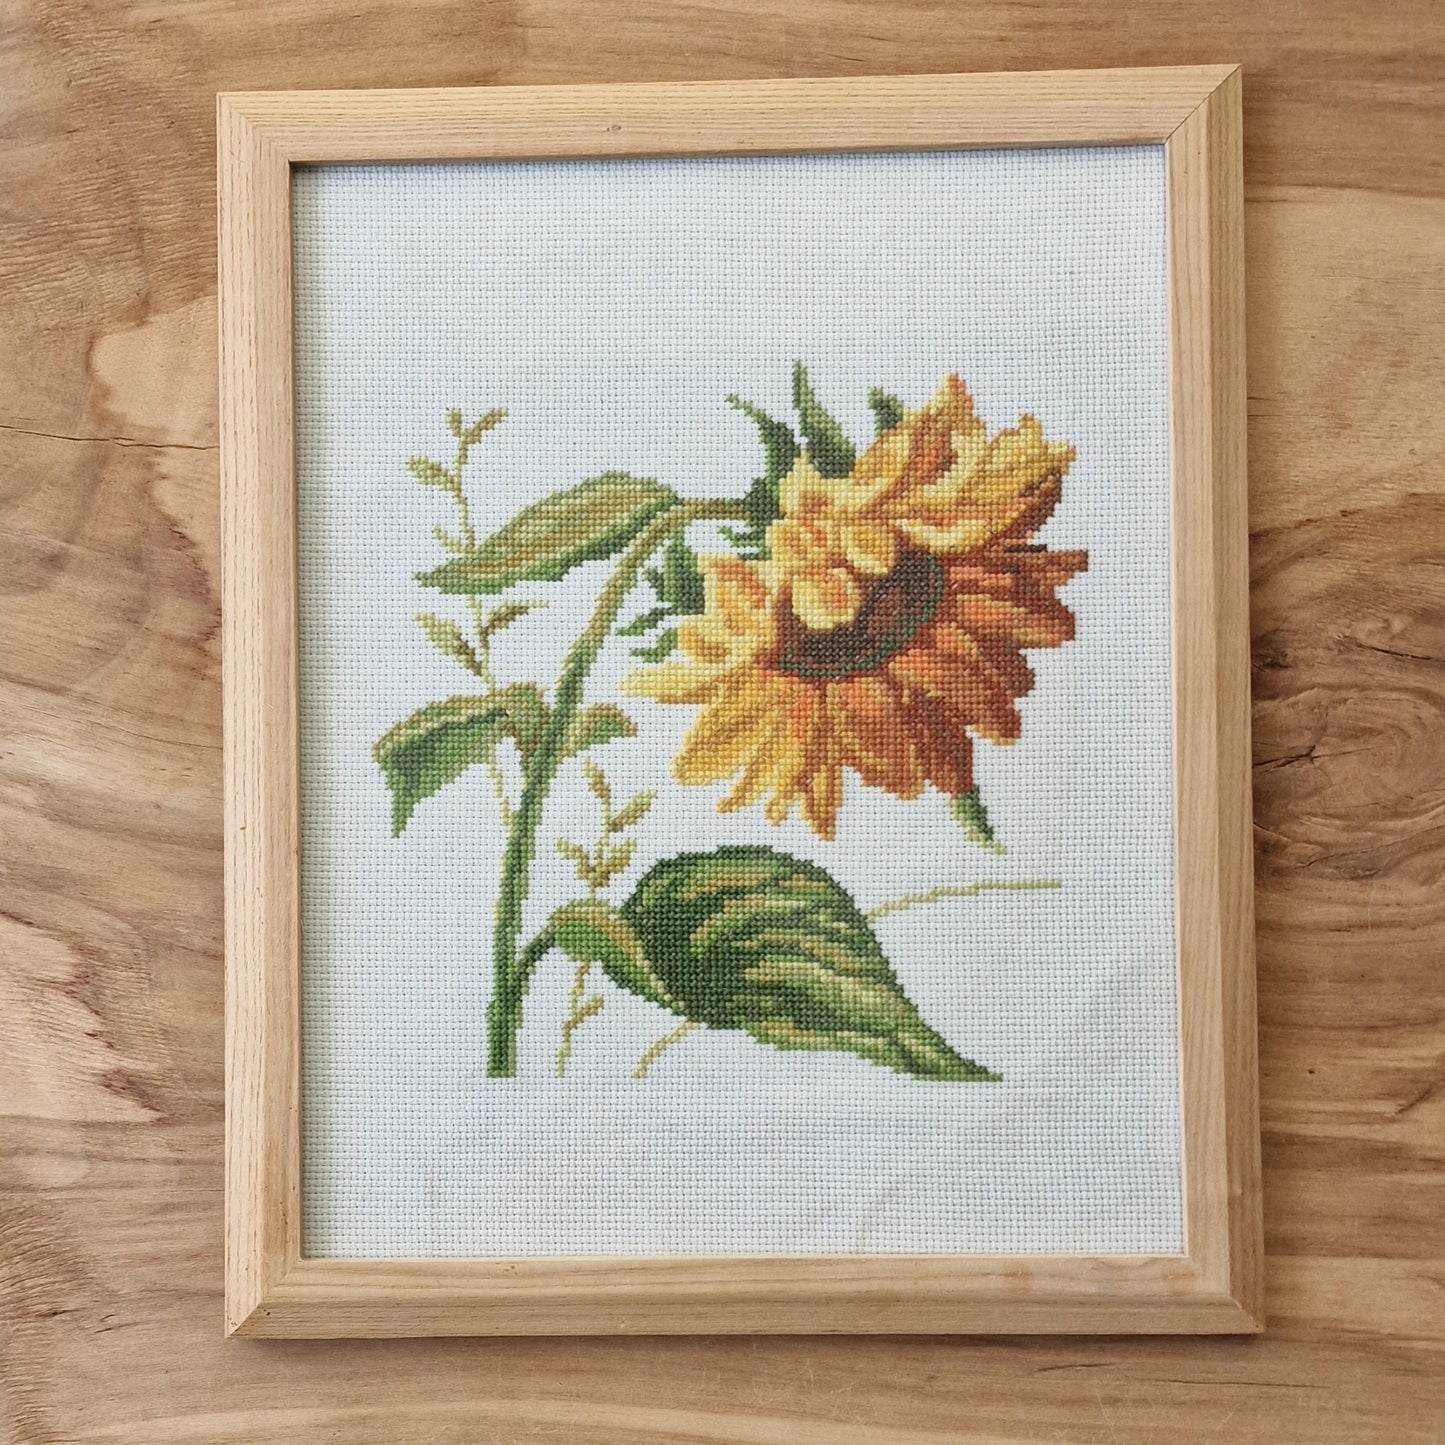 Embroidered painting "Sunflower" (INAU 1)